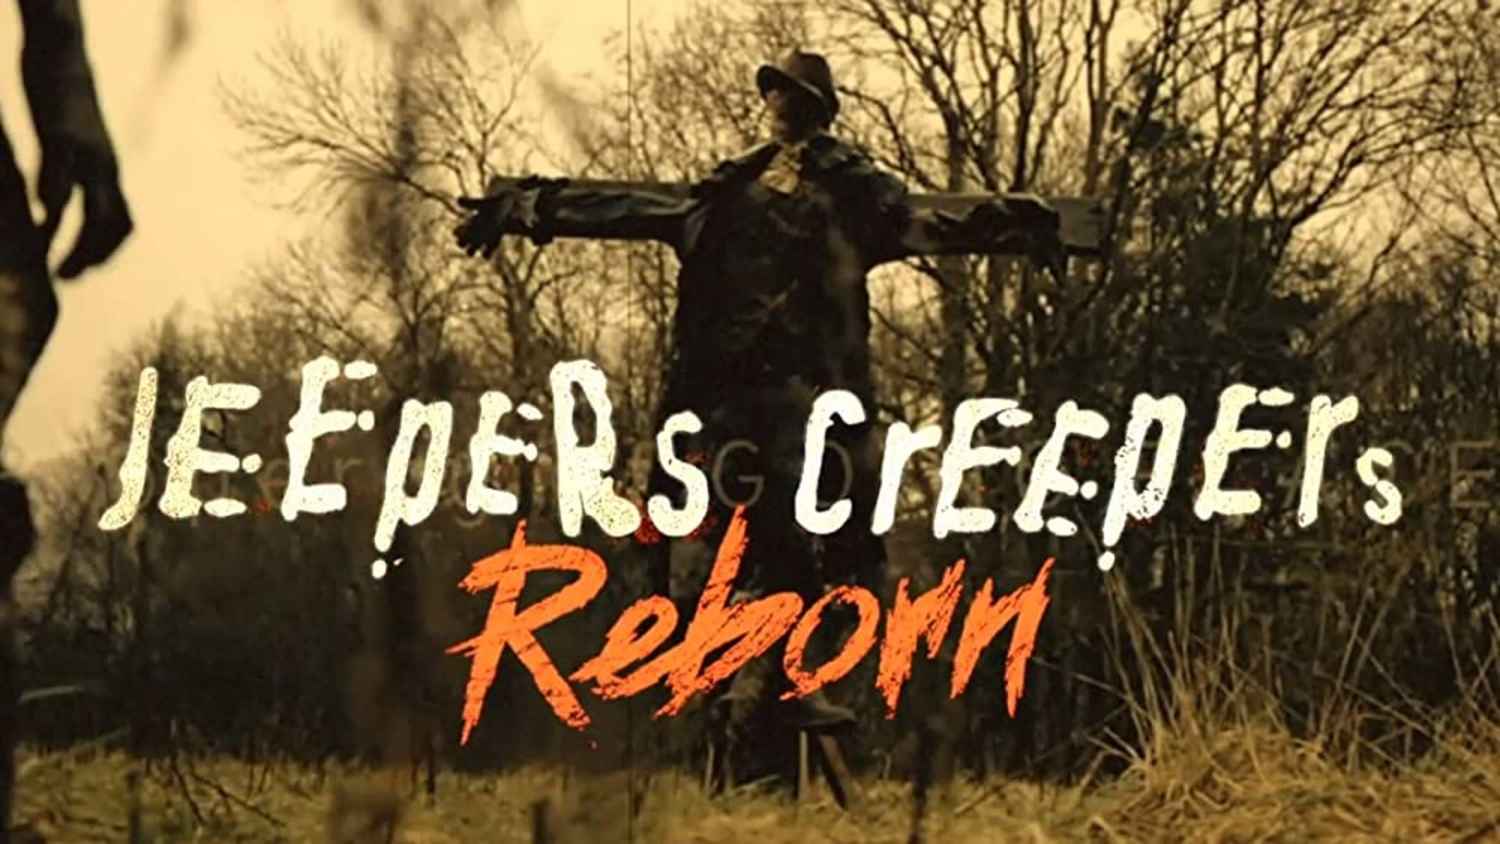 jeepers creepers free full movie